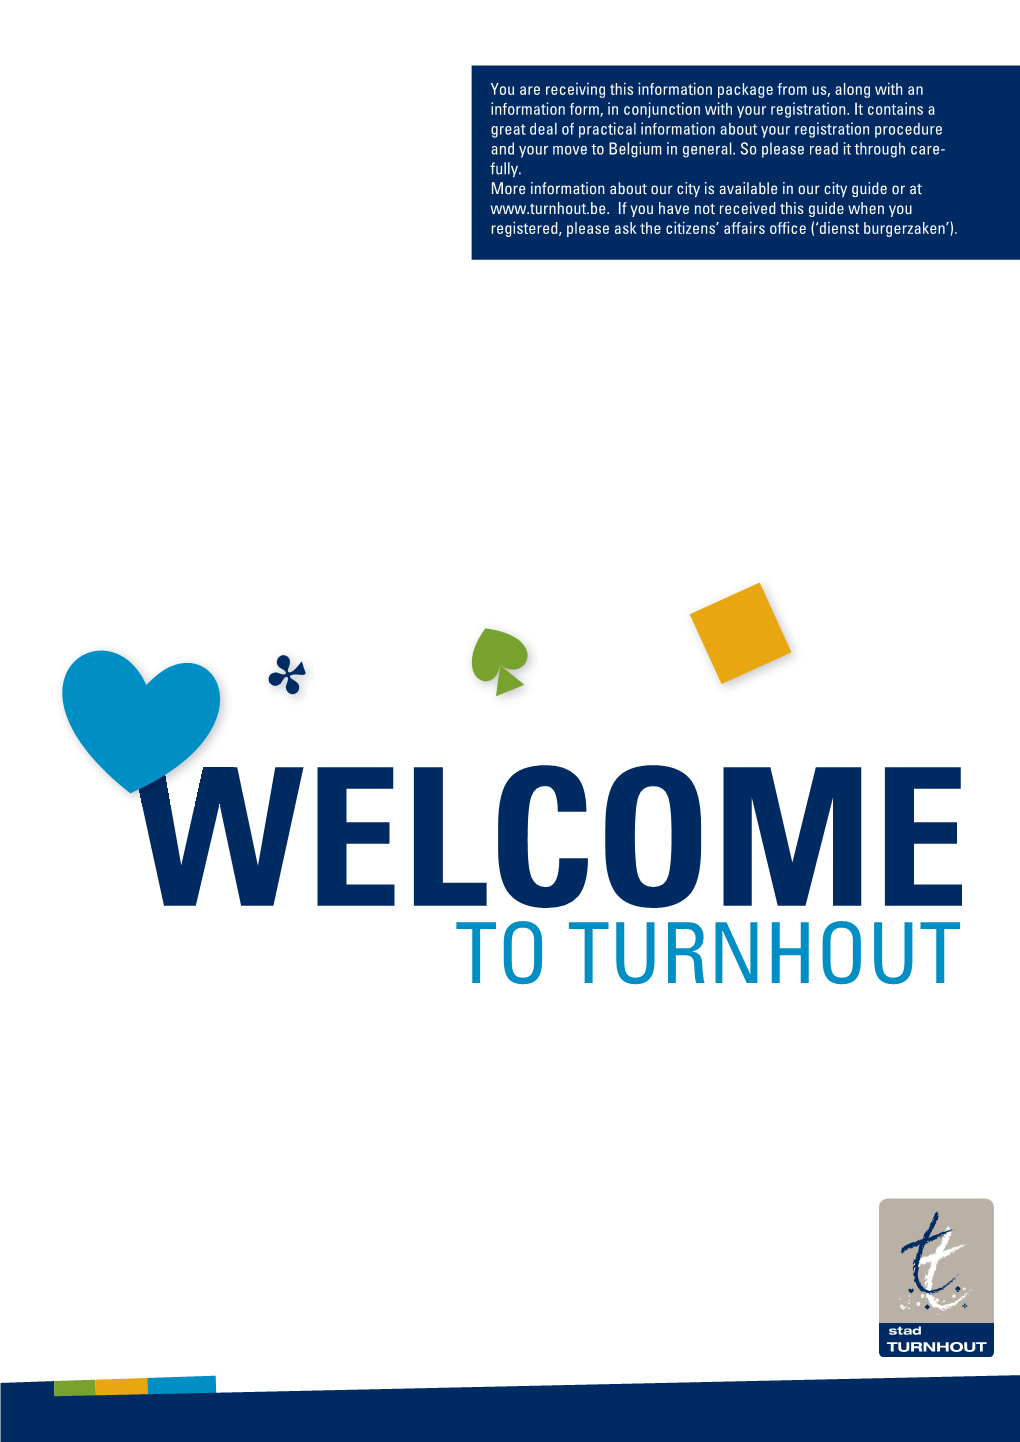 To Turnhout Summary: How Does the Registration Process Work?